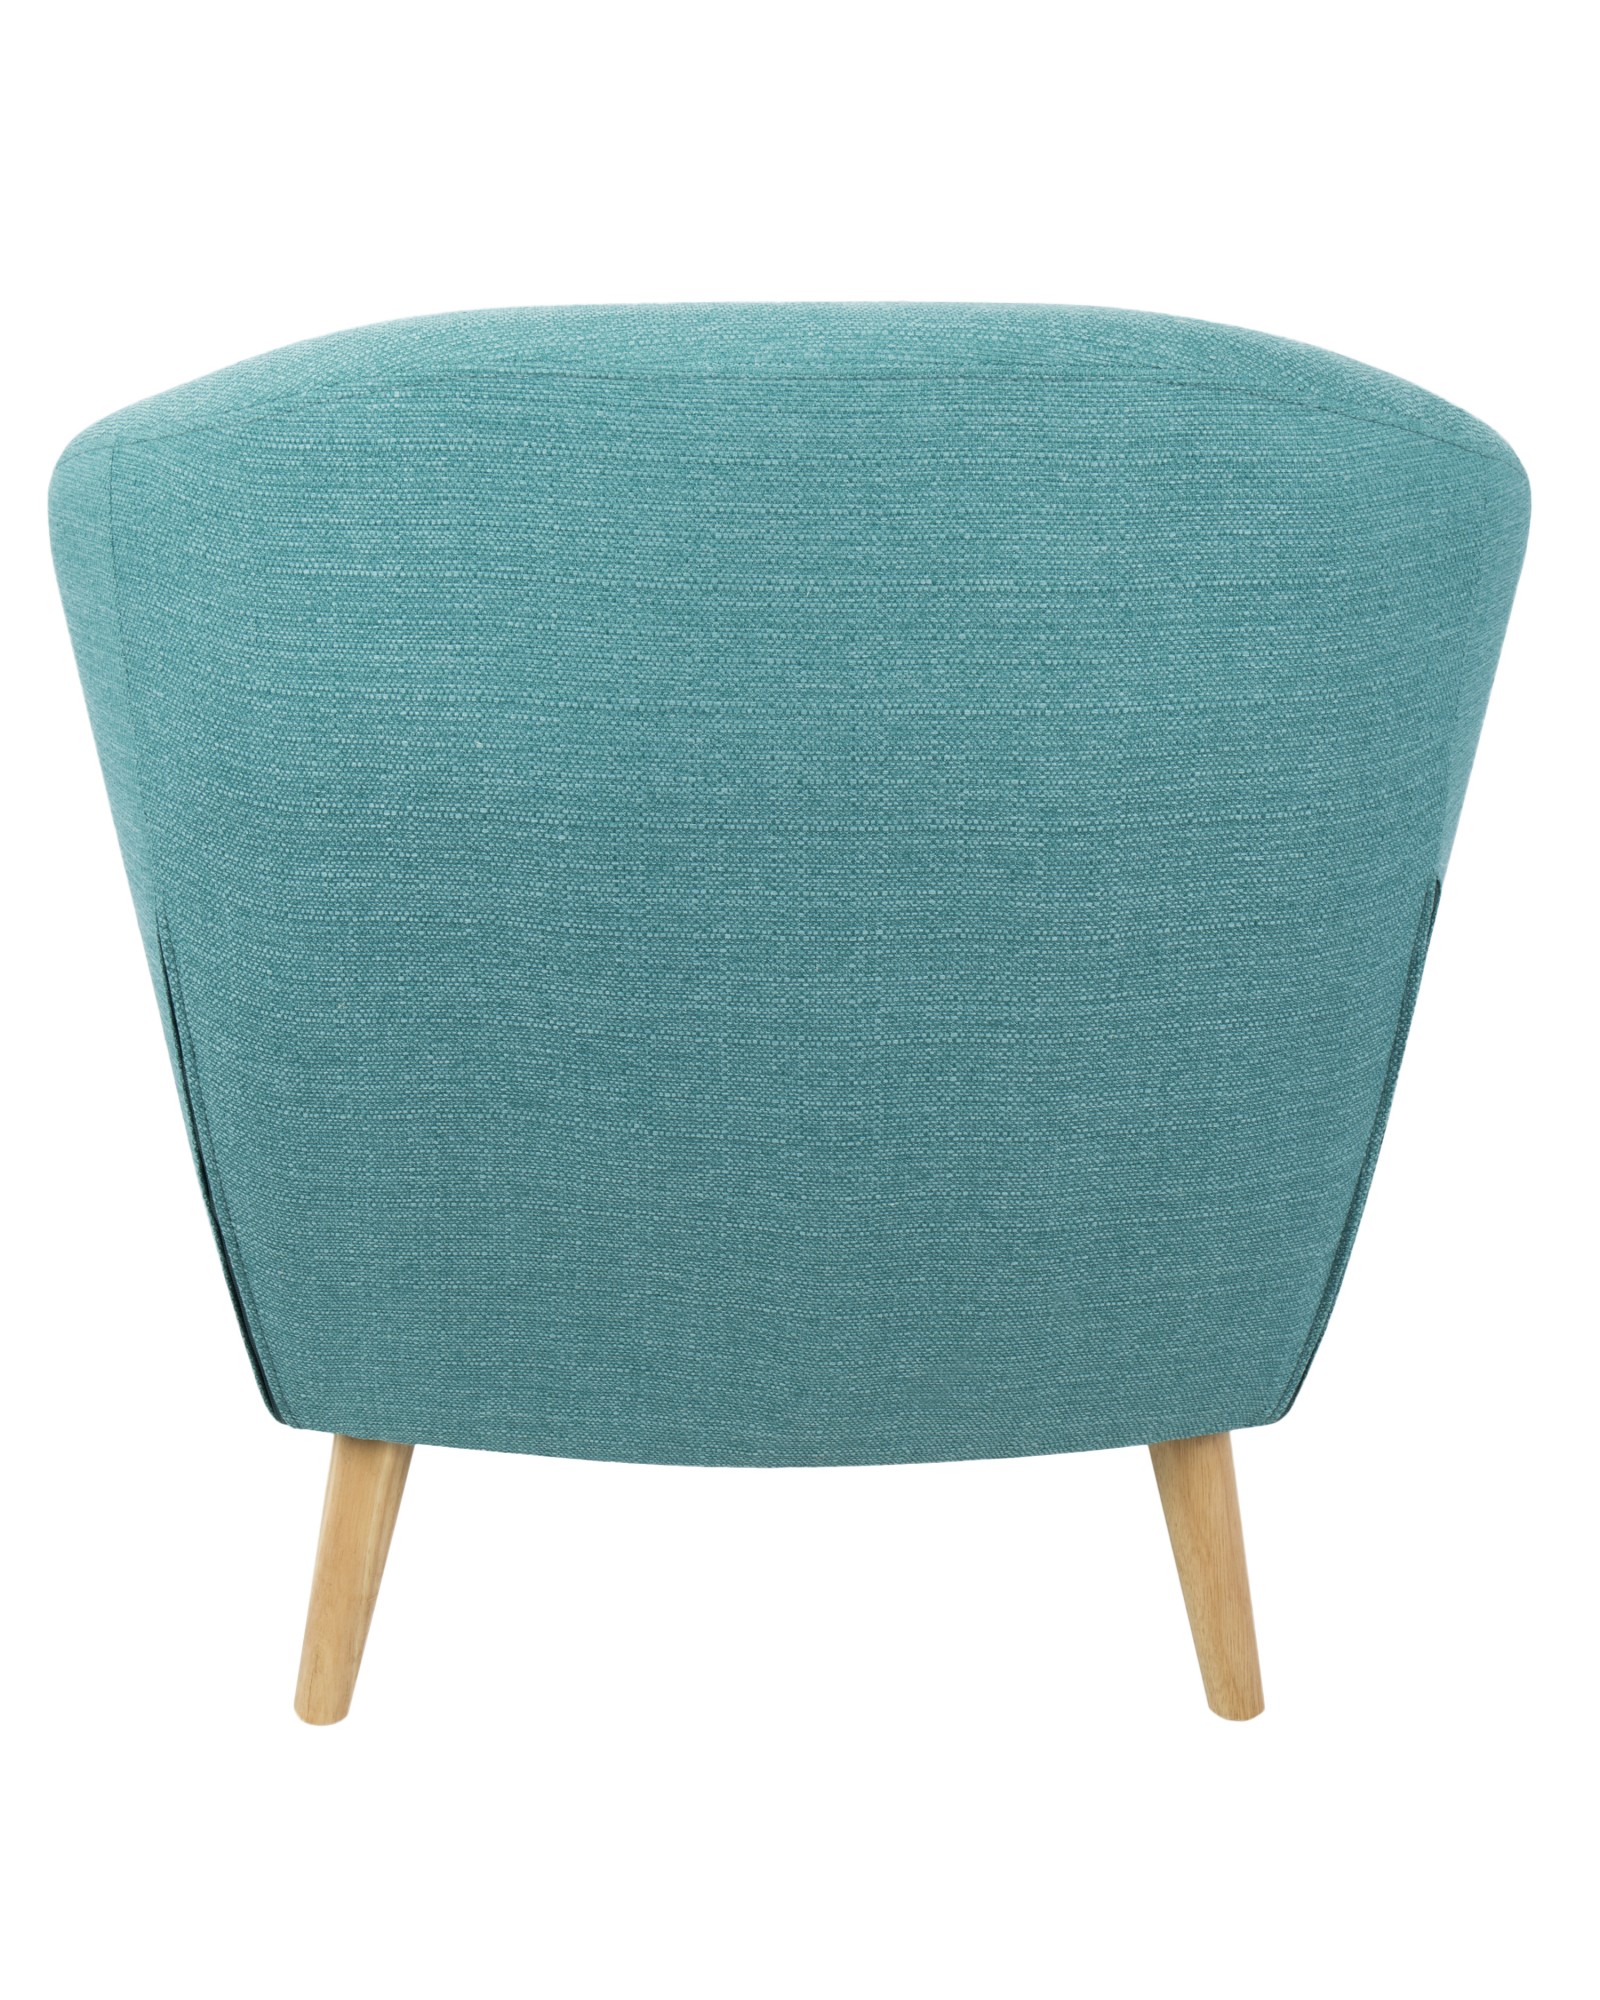 Rockwell Mid Century Modern Accent Chair in Teal